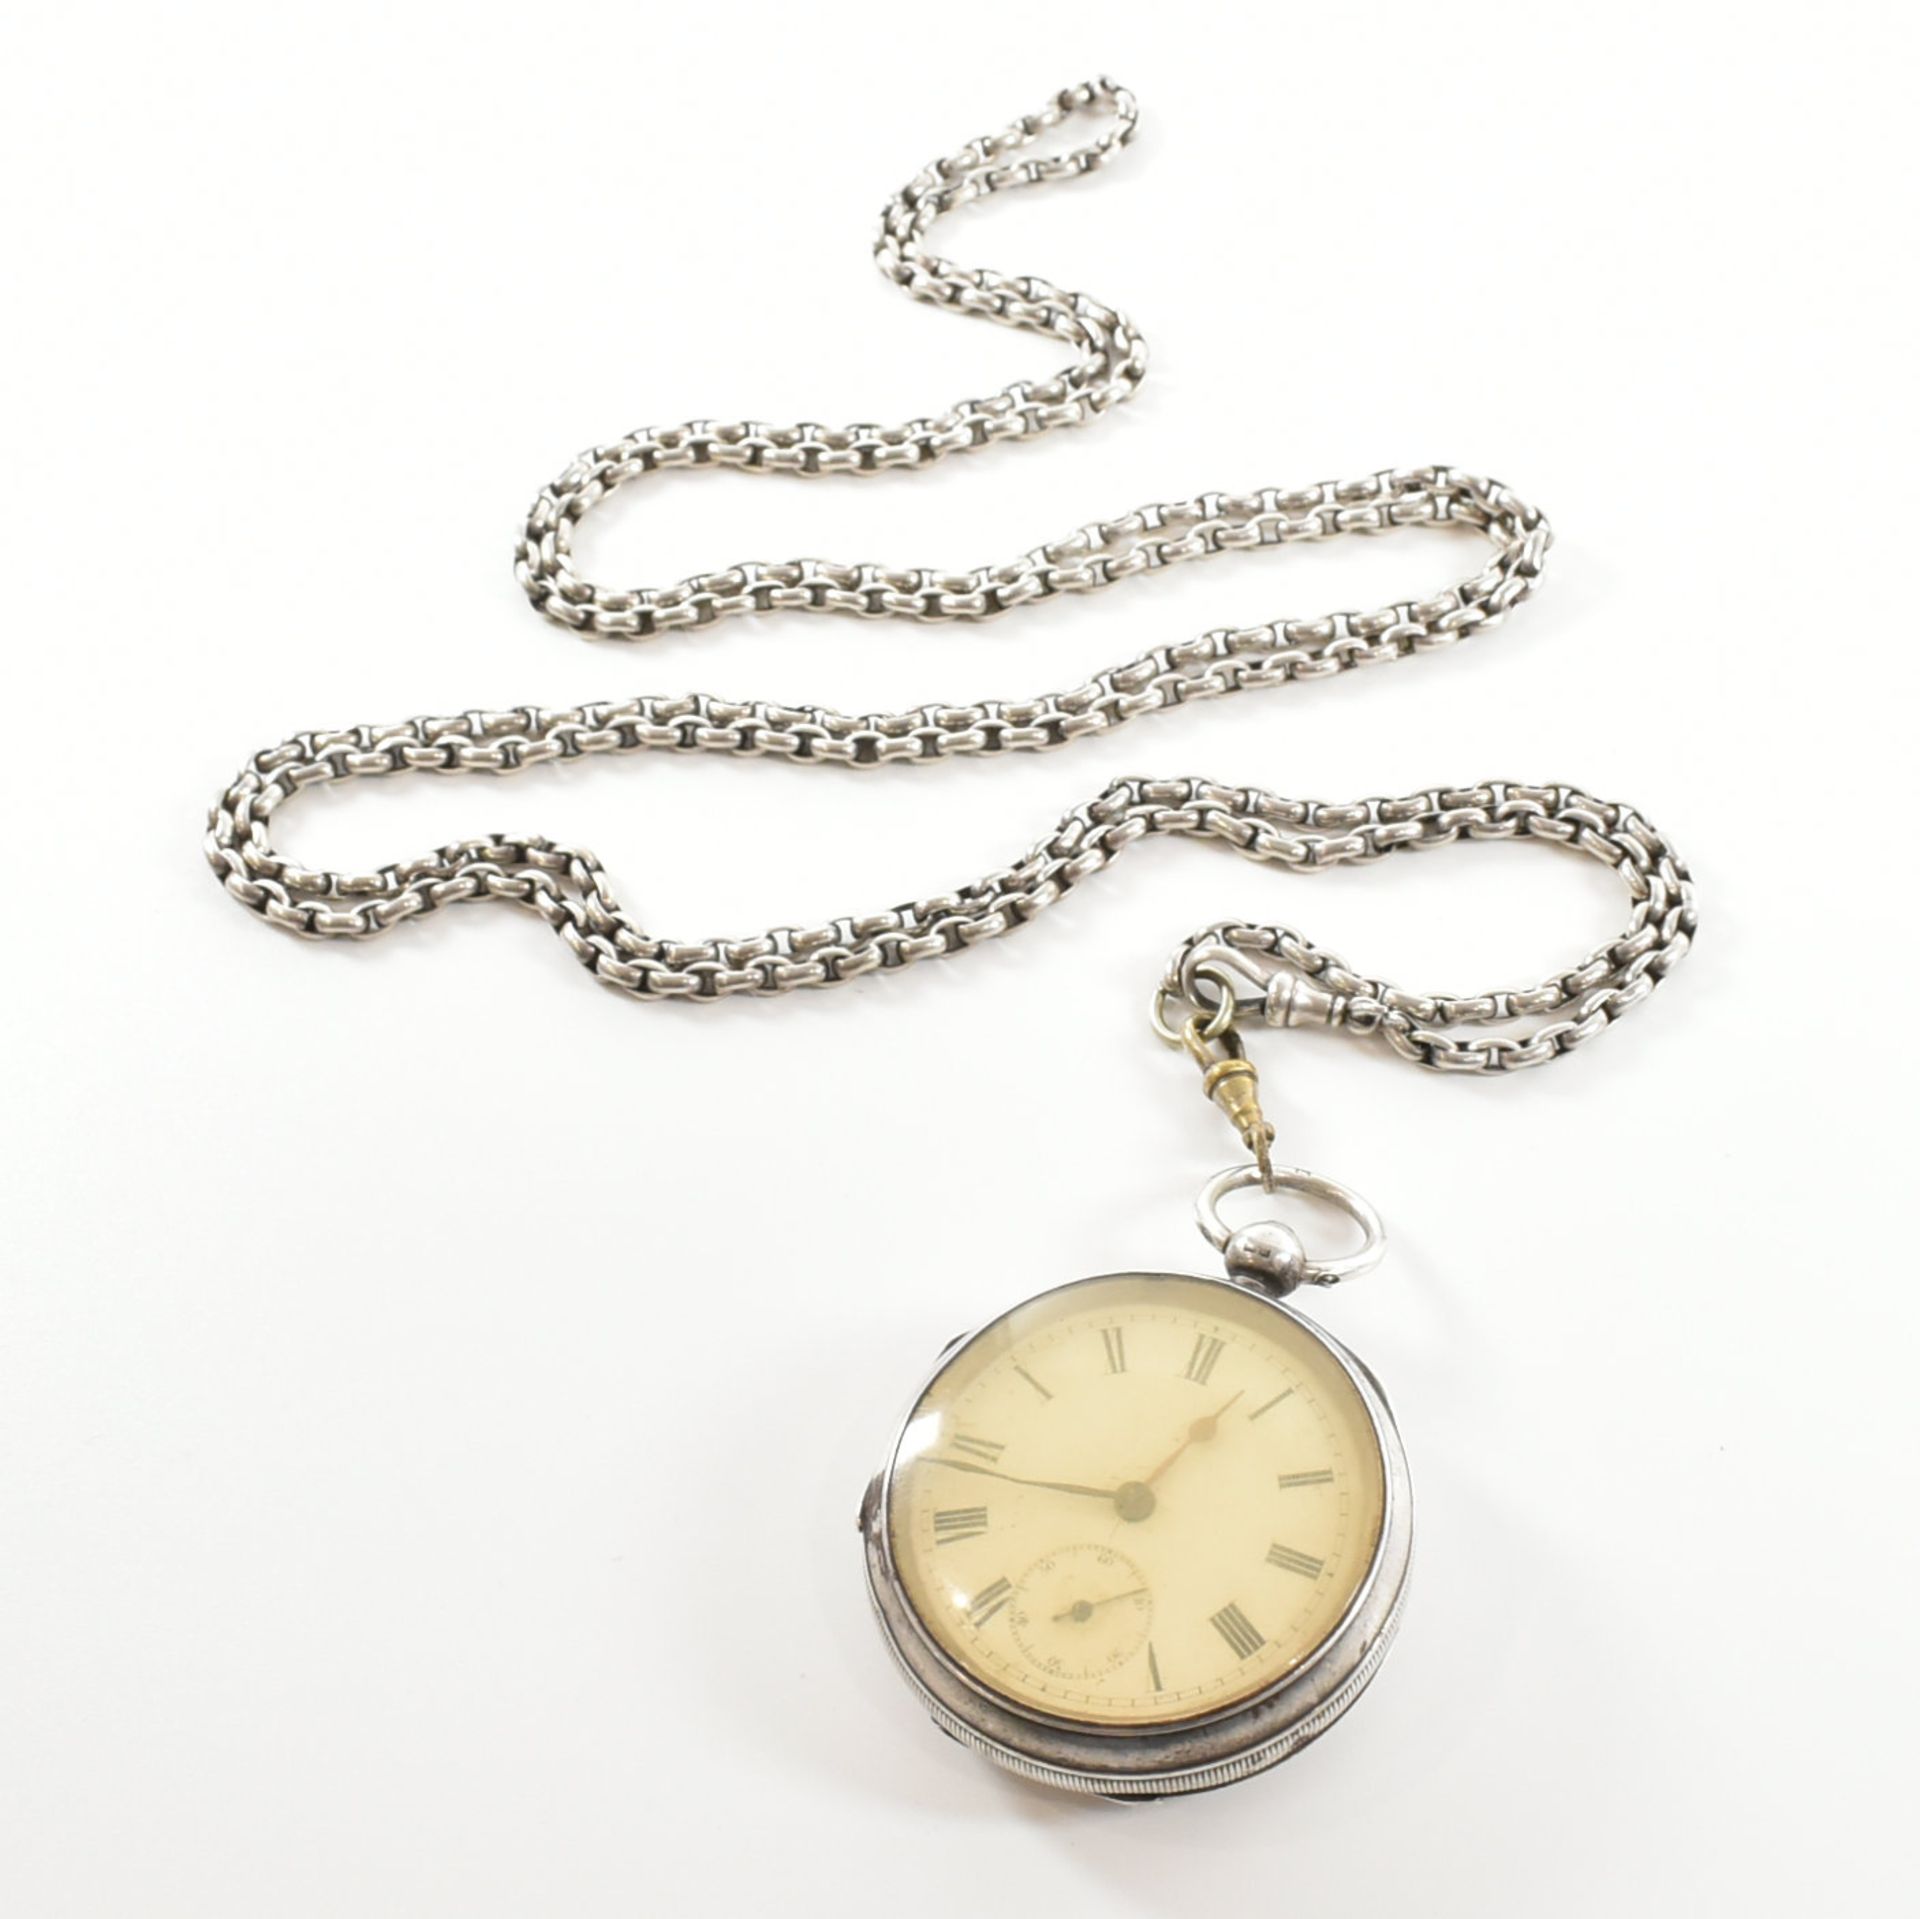 EARLY 20TH CENTURY 1901 HALLMARKED SILVER CASE POCKET WATCH - Image 2 of 14